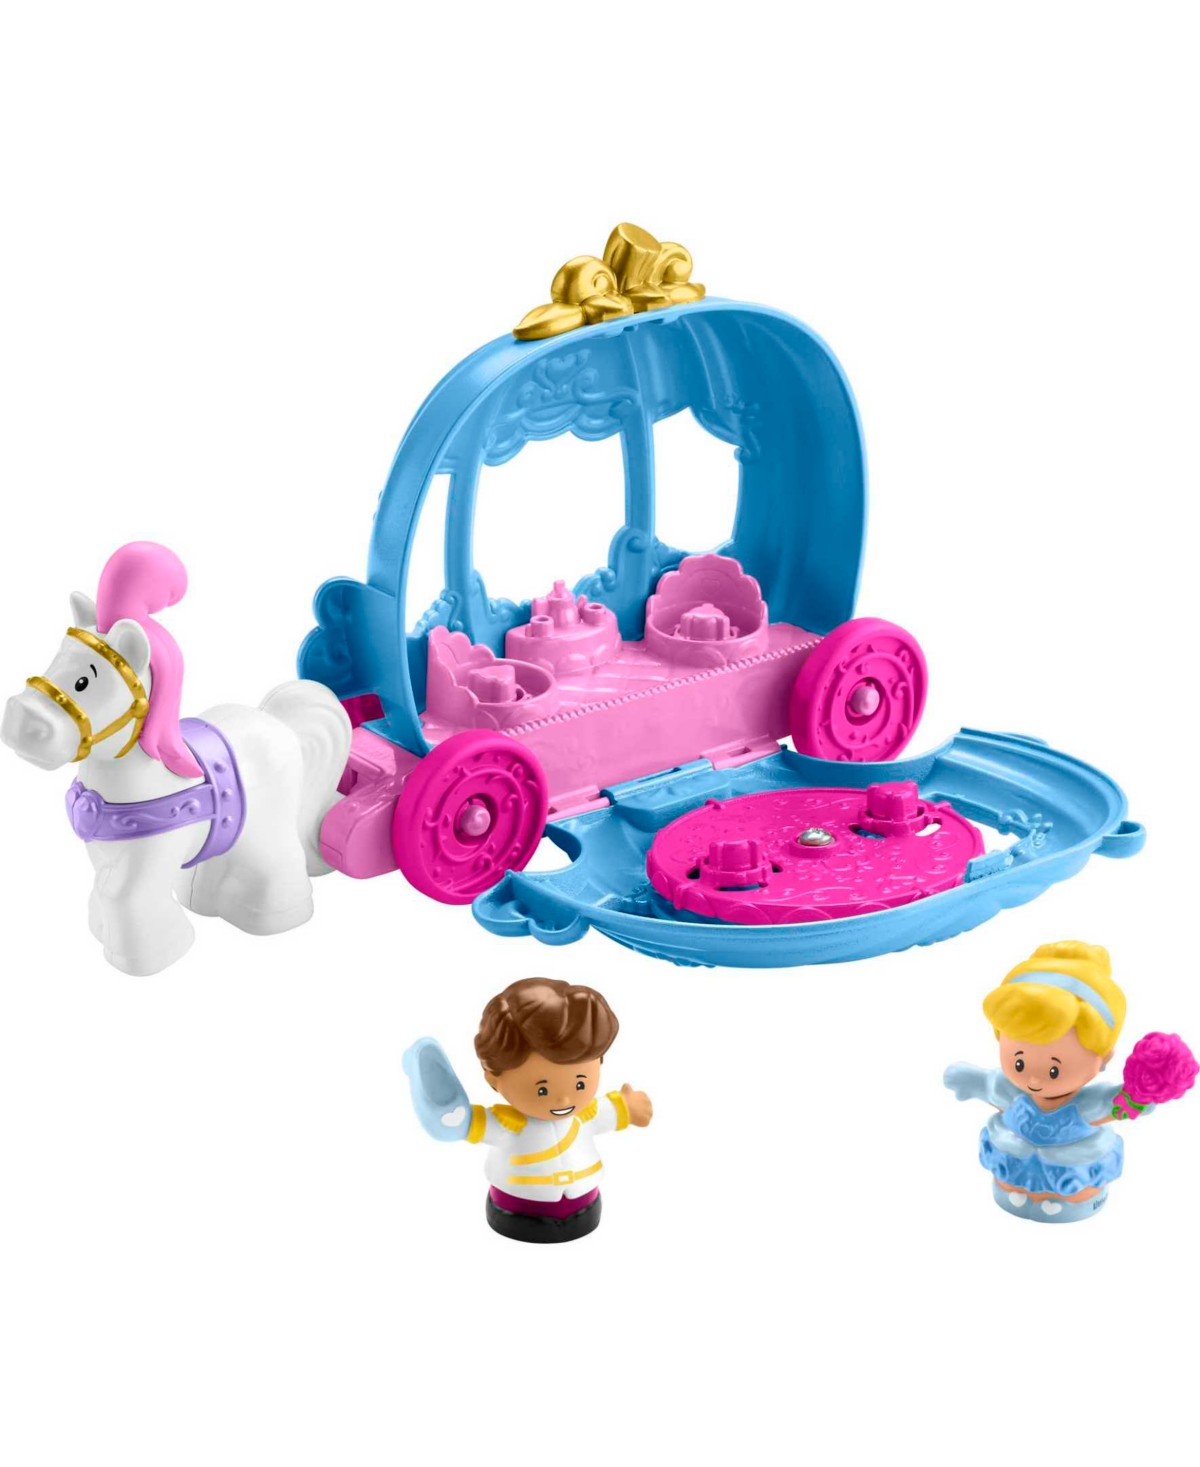 Fisher Price Kids' Disney Princess Cinderella's Dancing Carriage By Little People Set In Multi